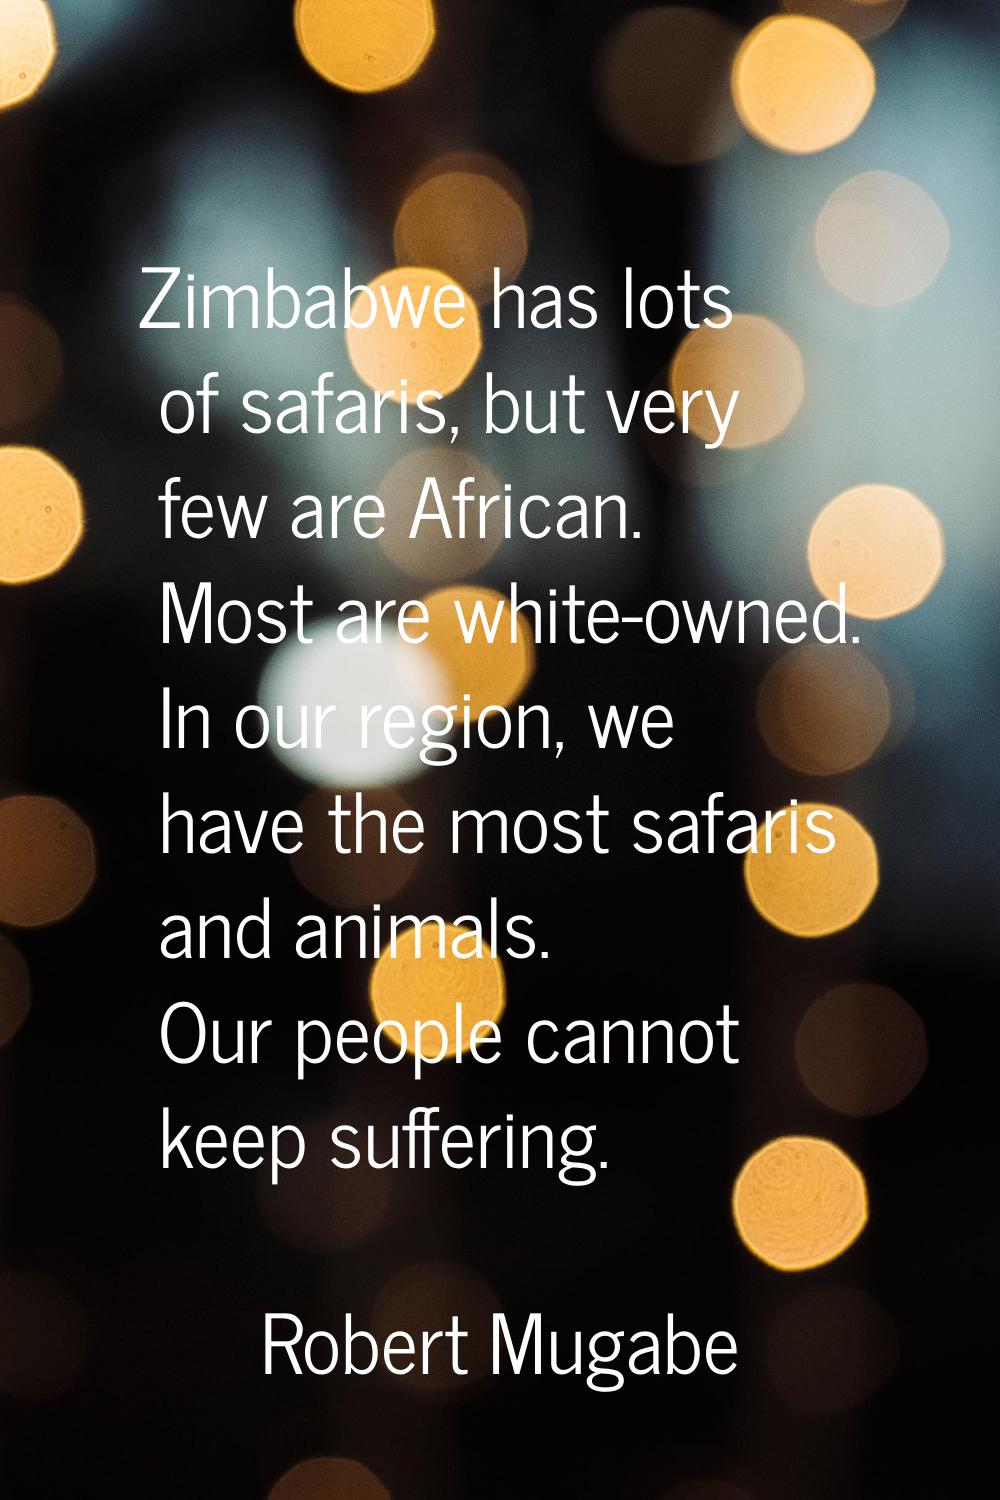 Zimbabwe has lots of safaris, but very few are African. Most are white-owned. In our region, we hav